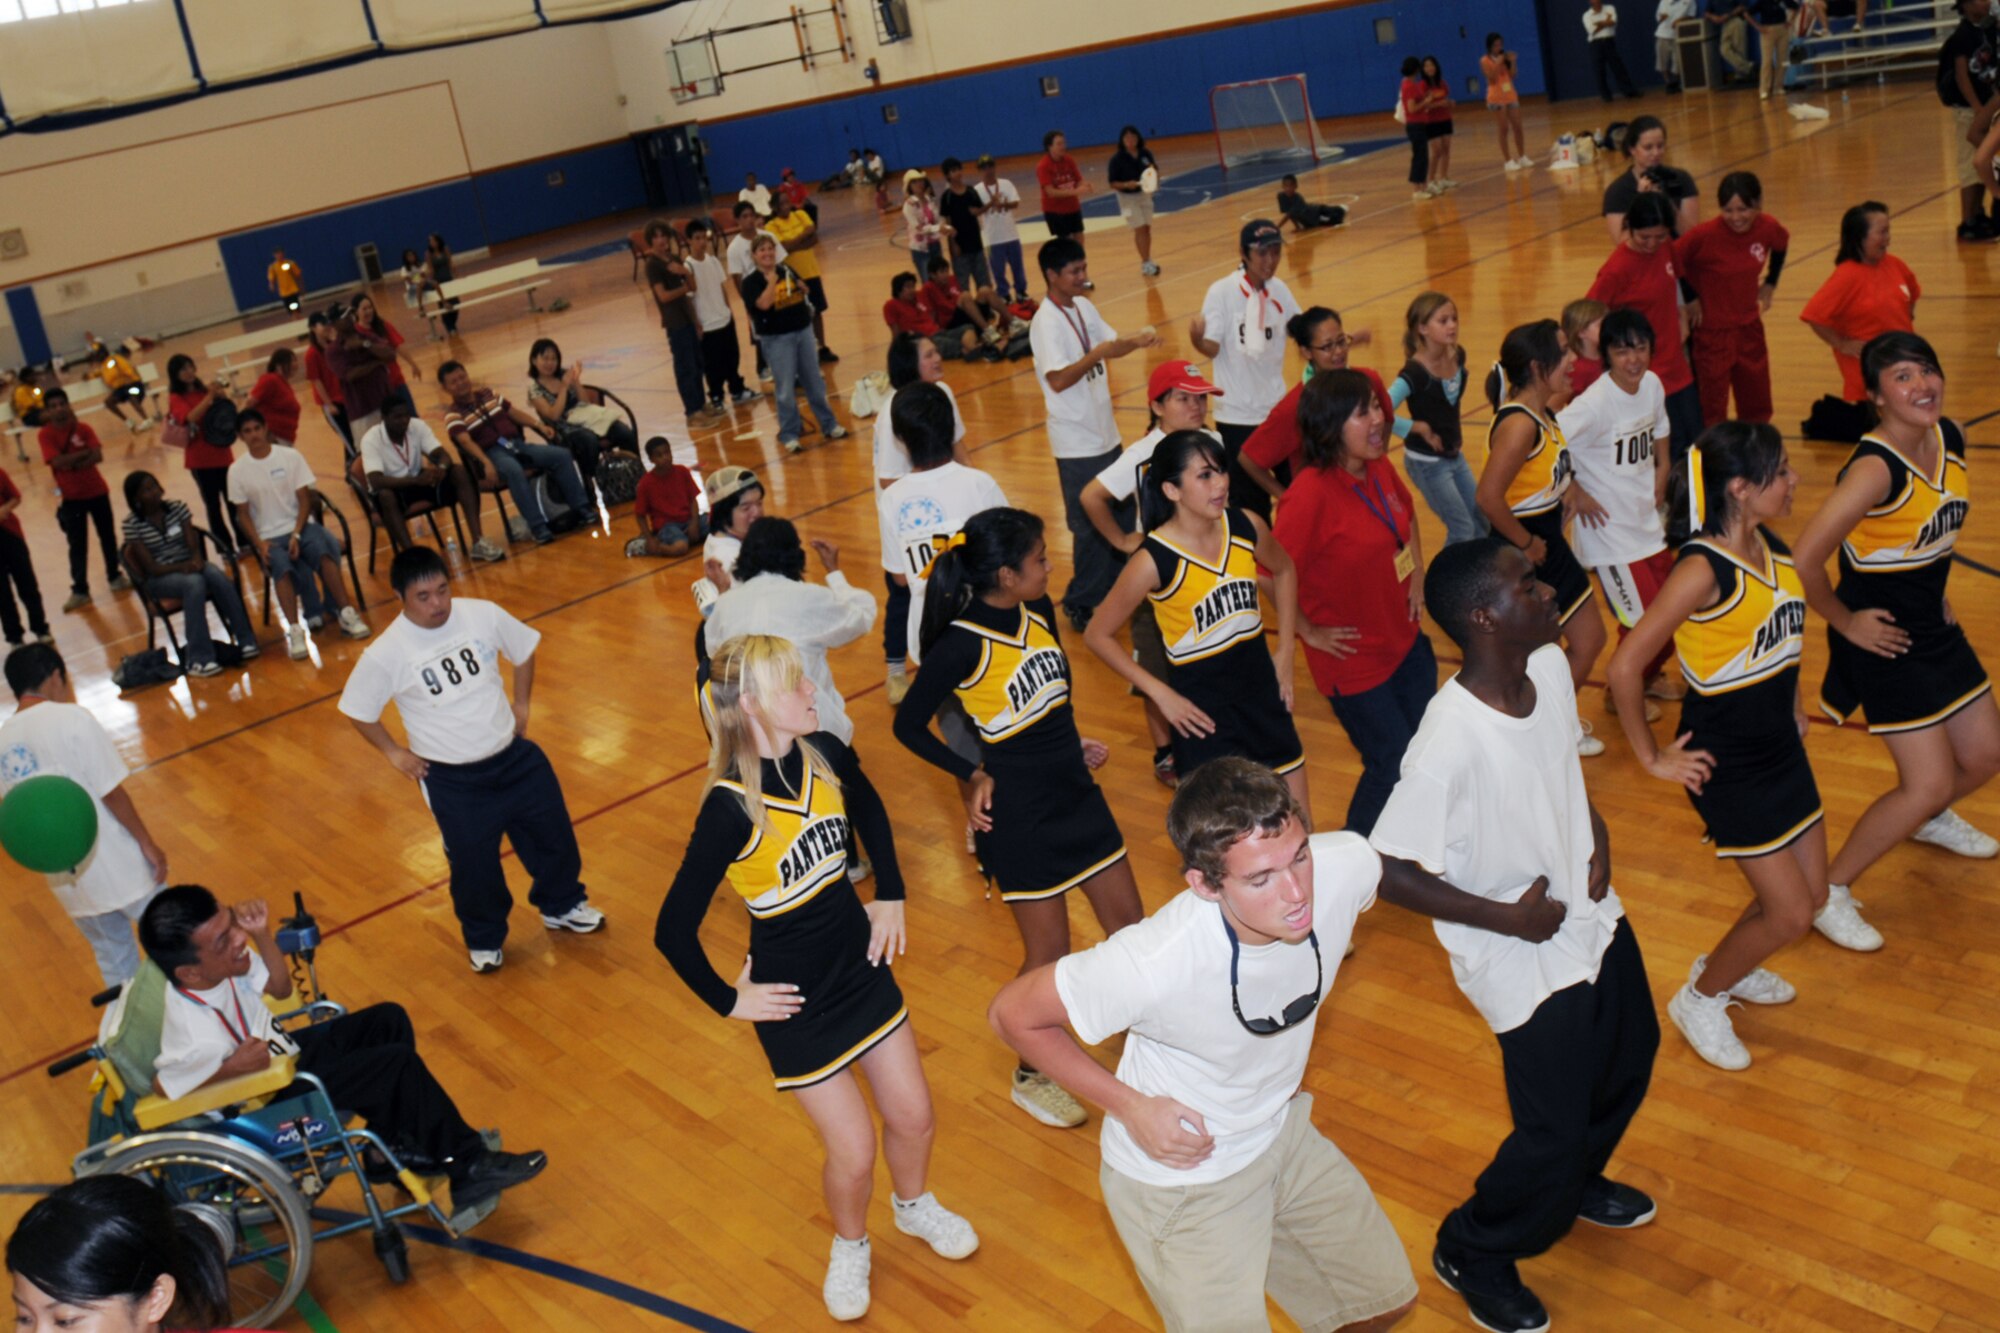 Special Olympic athletes, volunteers, and spectators join together to dance the Macarena in the Risner Fitness Center during the Kadena Special Olympics Nov. 8, 2008. Kadena Air Base hosted the 9th Annual Special Olympic Games and Art Festival for special needs Okinawan and American adult and child athletes. (U.S. Air Force photo/Airman 1st Class Chad Warren)
                                             